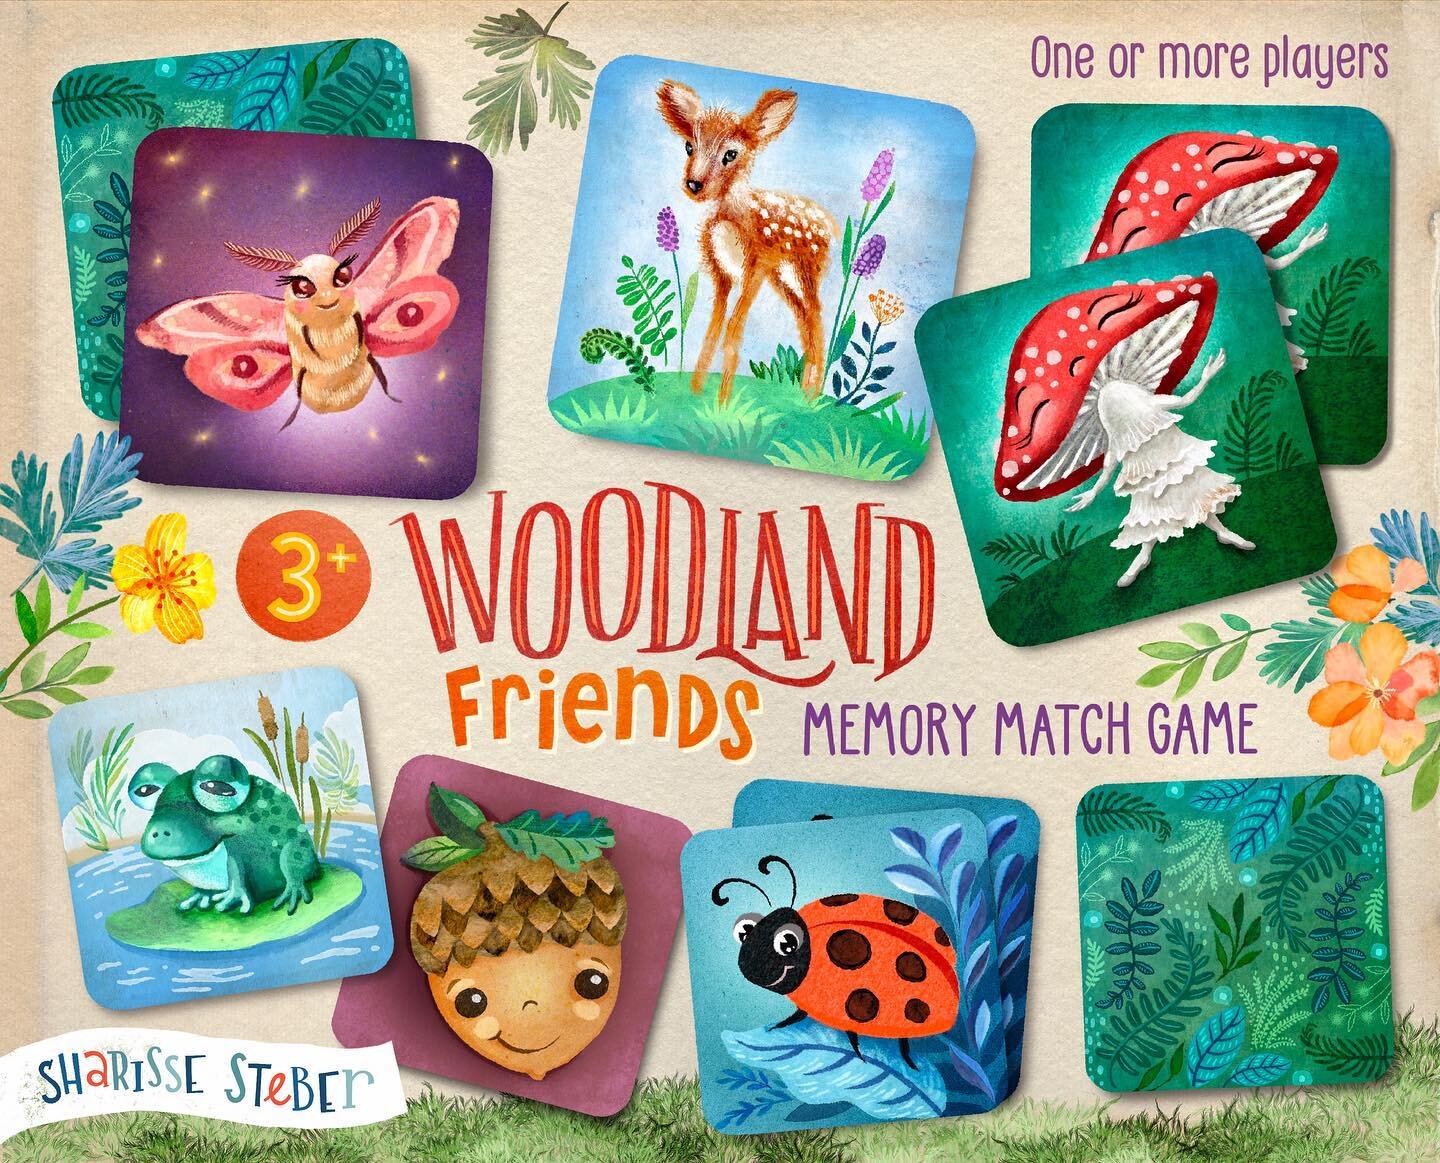 The final memory match card project for the @makeartthatsells kids game June assignment. I still hope to finish out the rest of the woodland friends and make a full game set. 🌿🍄🐸🦋🐛🦊🐞 What a great boot camp this year. I highly recommend taking 